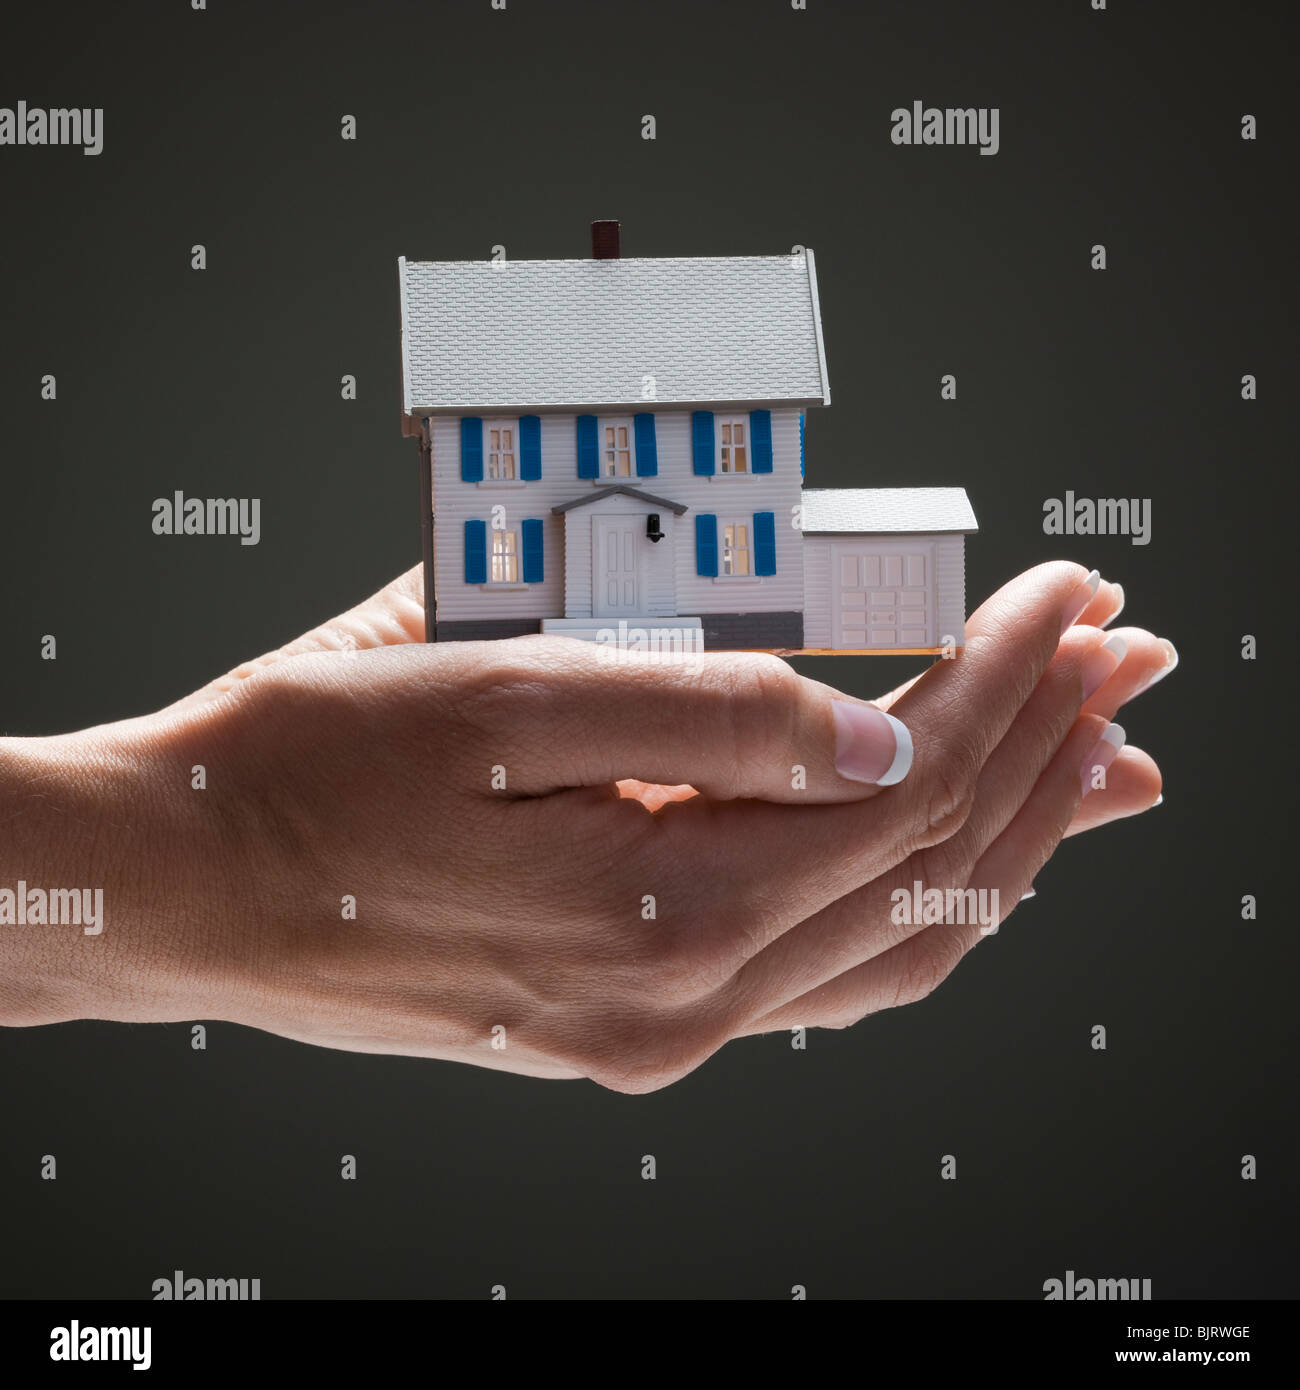 Hand holding a home Stock Photo